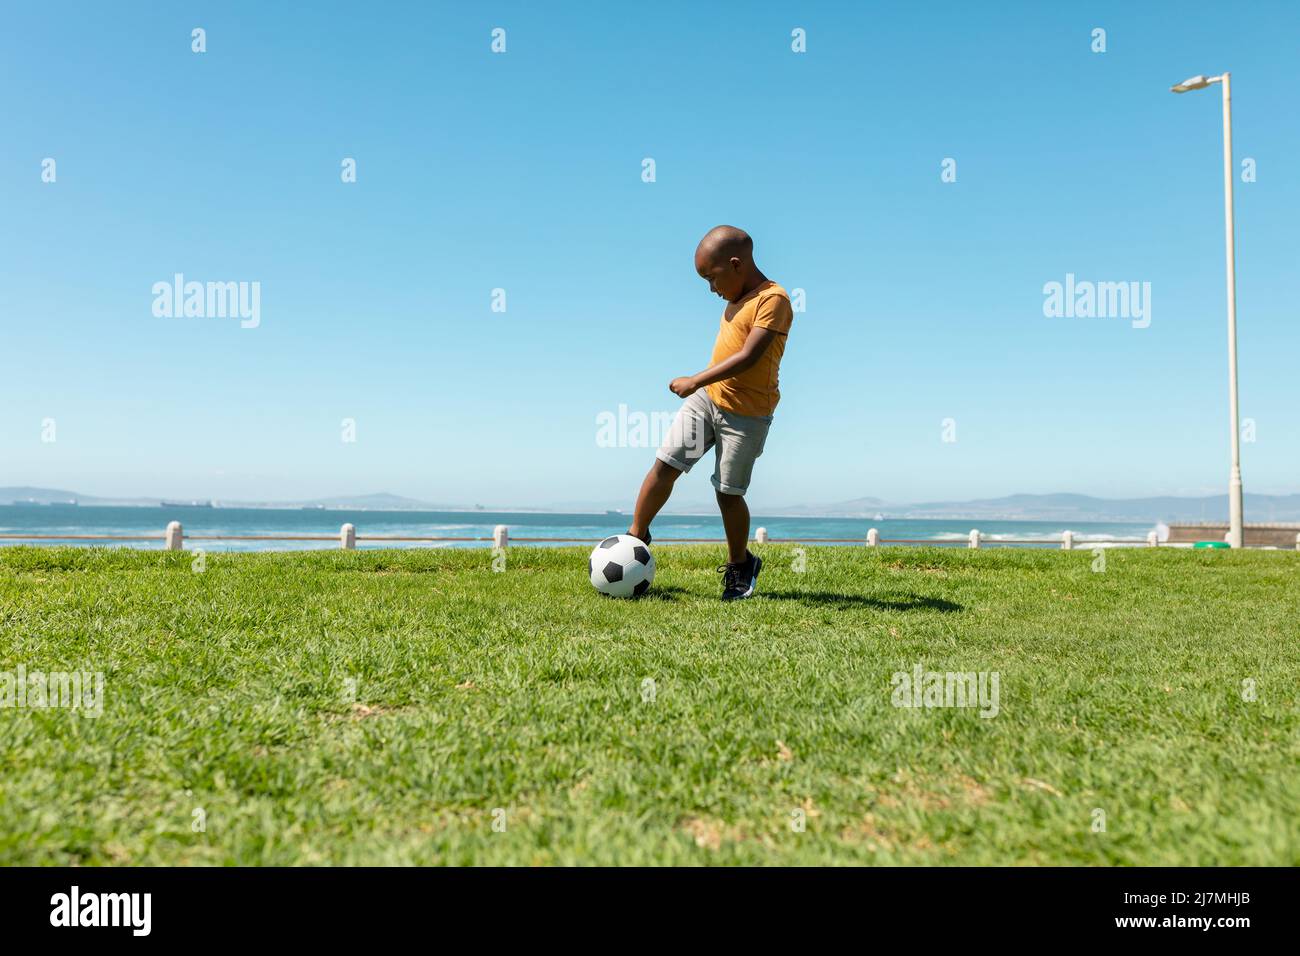 Full length of african american boy kicking soccer ball on grass against blue sky with copy space Stock Photo